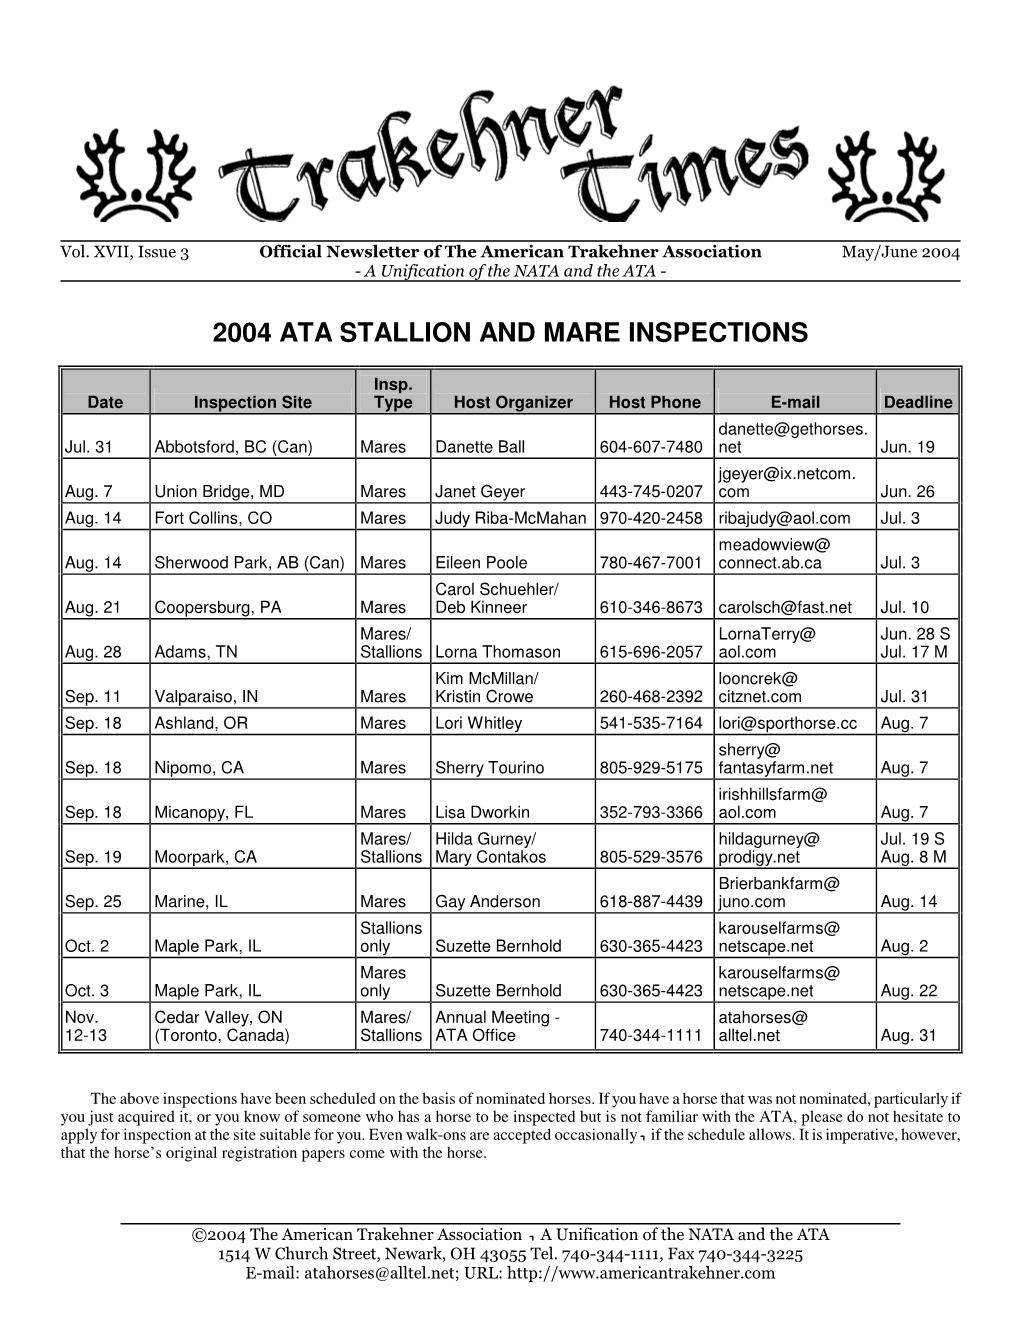 2004 Ata Stallion and Mare Inspections